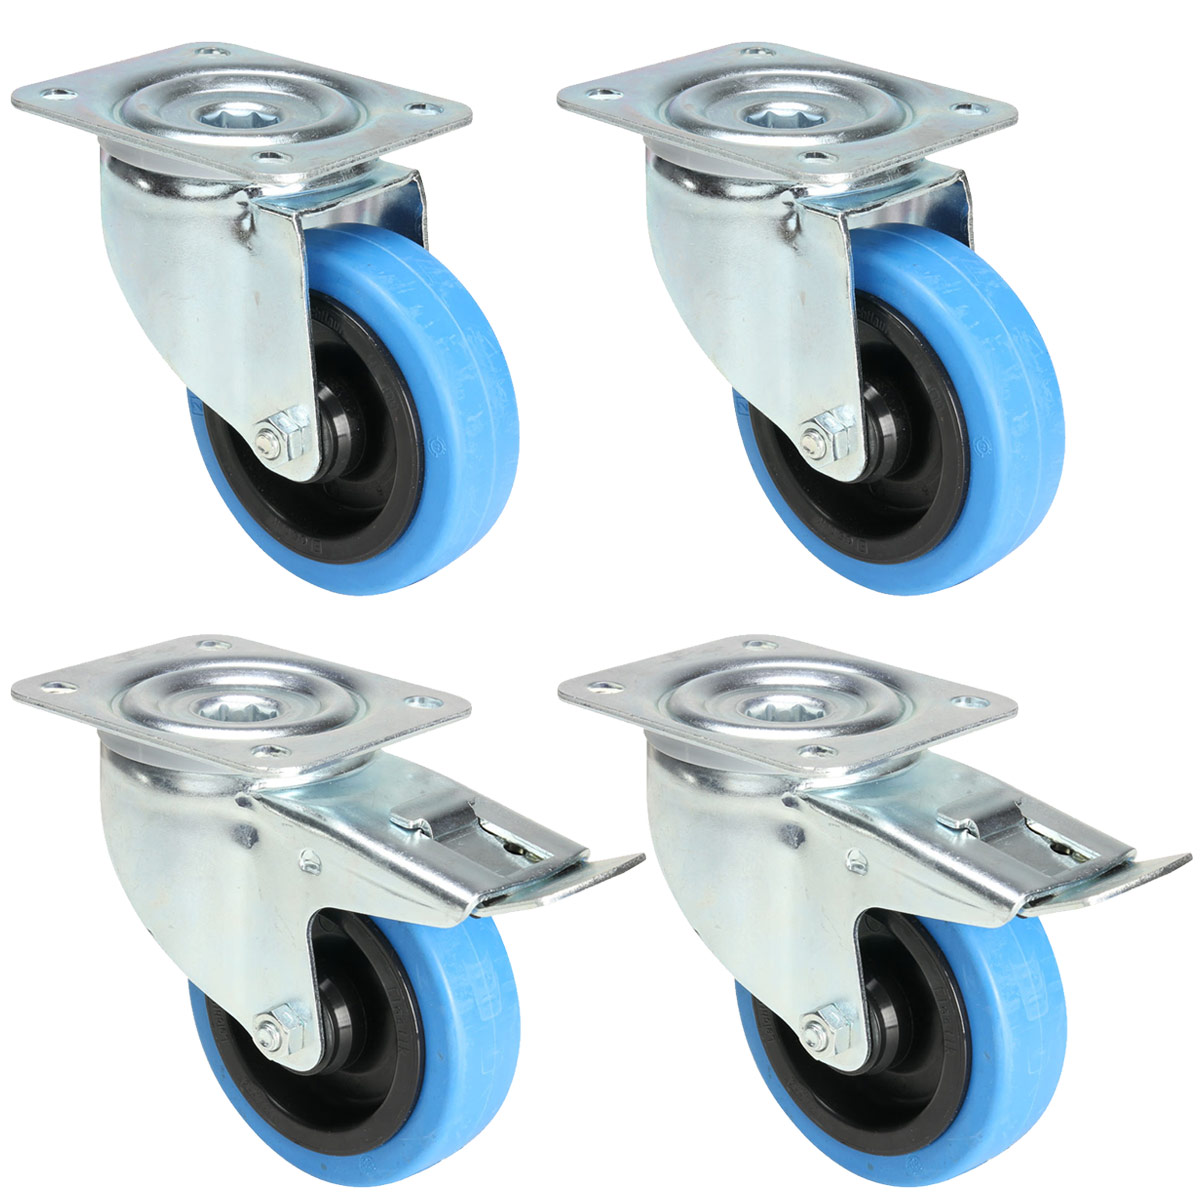 4 x Blue Wheels 100 mm (2 with and 2 without brake)